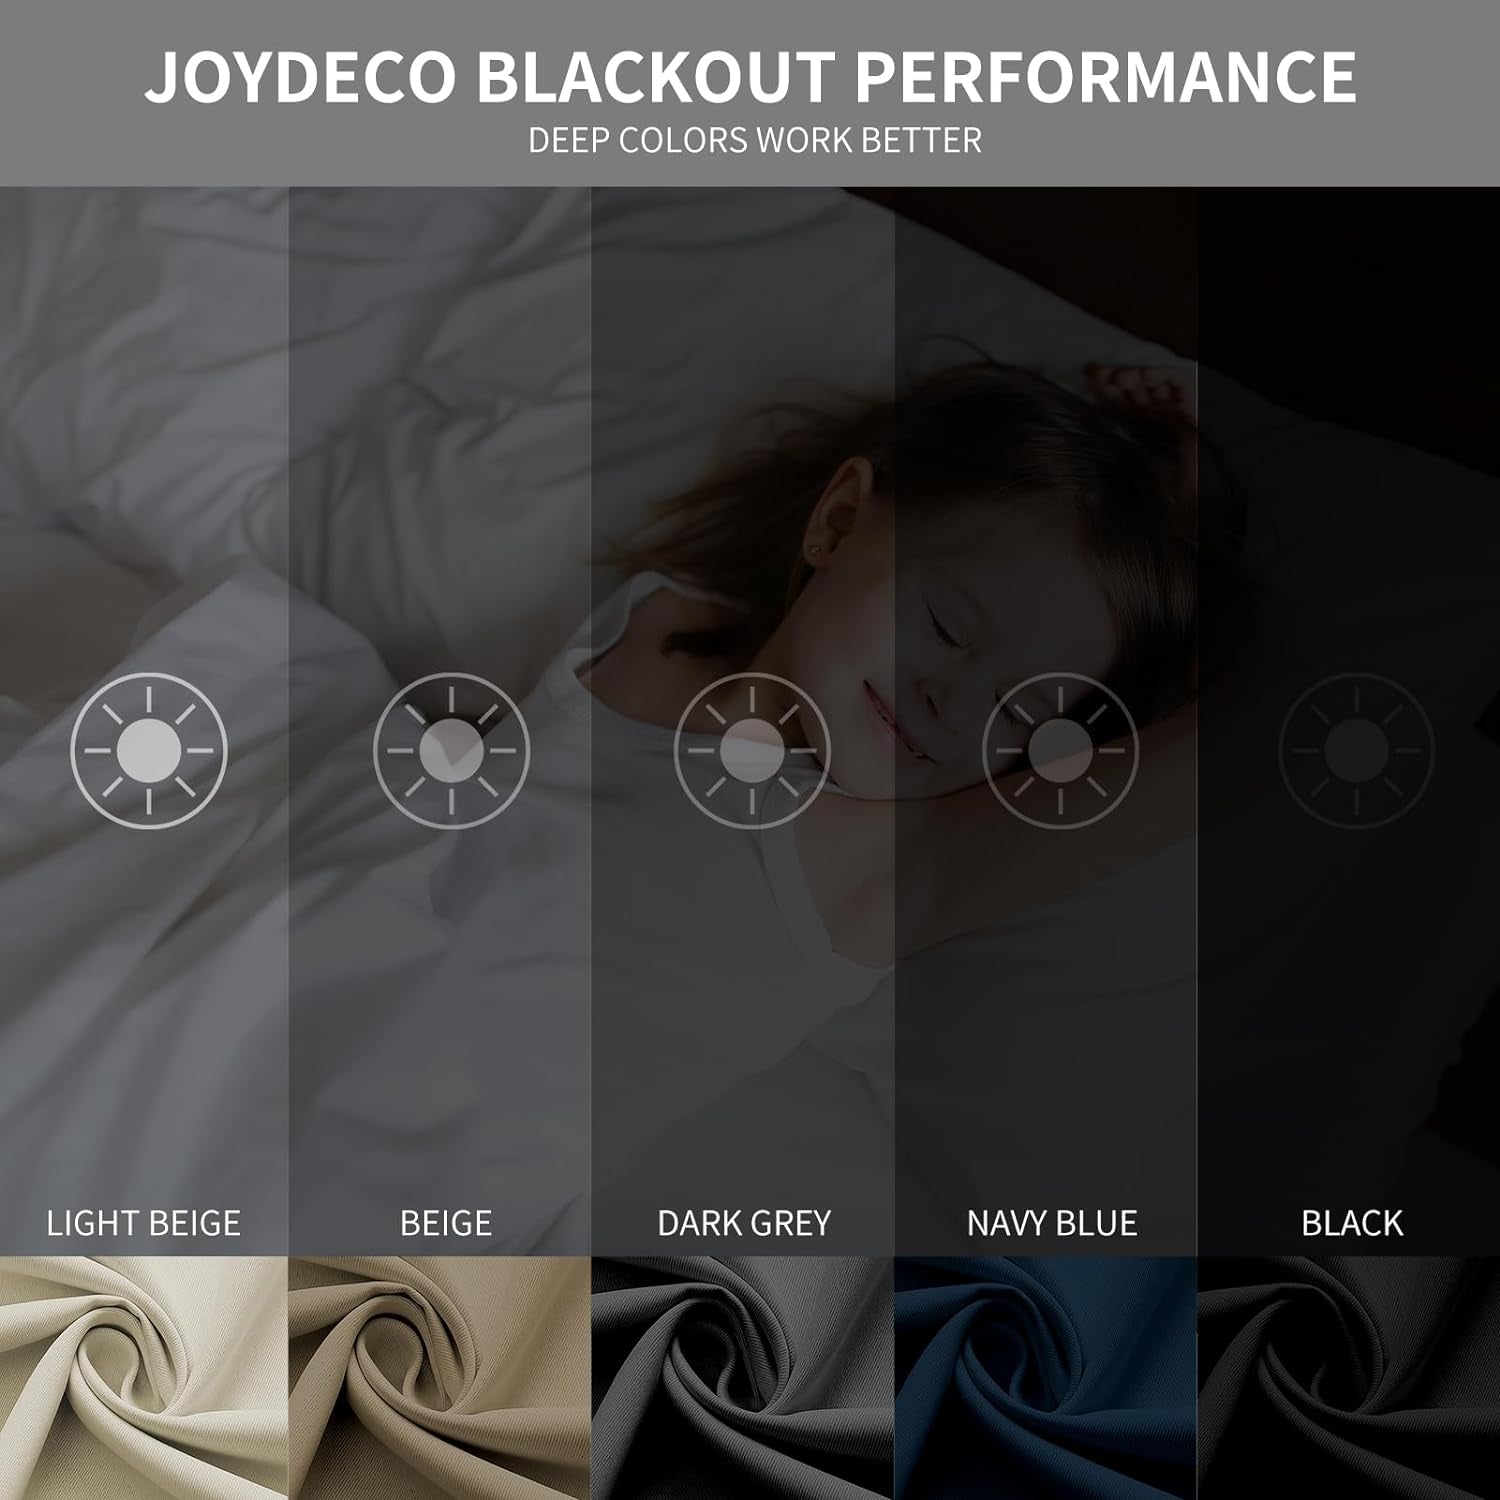 Joydeco Blackout Curtains 84 Inch Length 2 Panels Set, Thermal Insulated Long Curtains& Drapes 2 Burg, Room Darkening Grommet Curtains for Bedroom Living Room Window (Black, W52 X L84 Inch)  Joydeco   